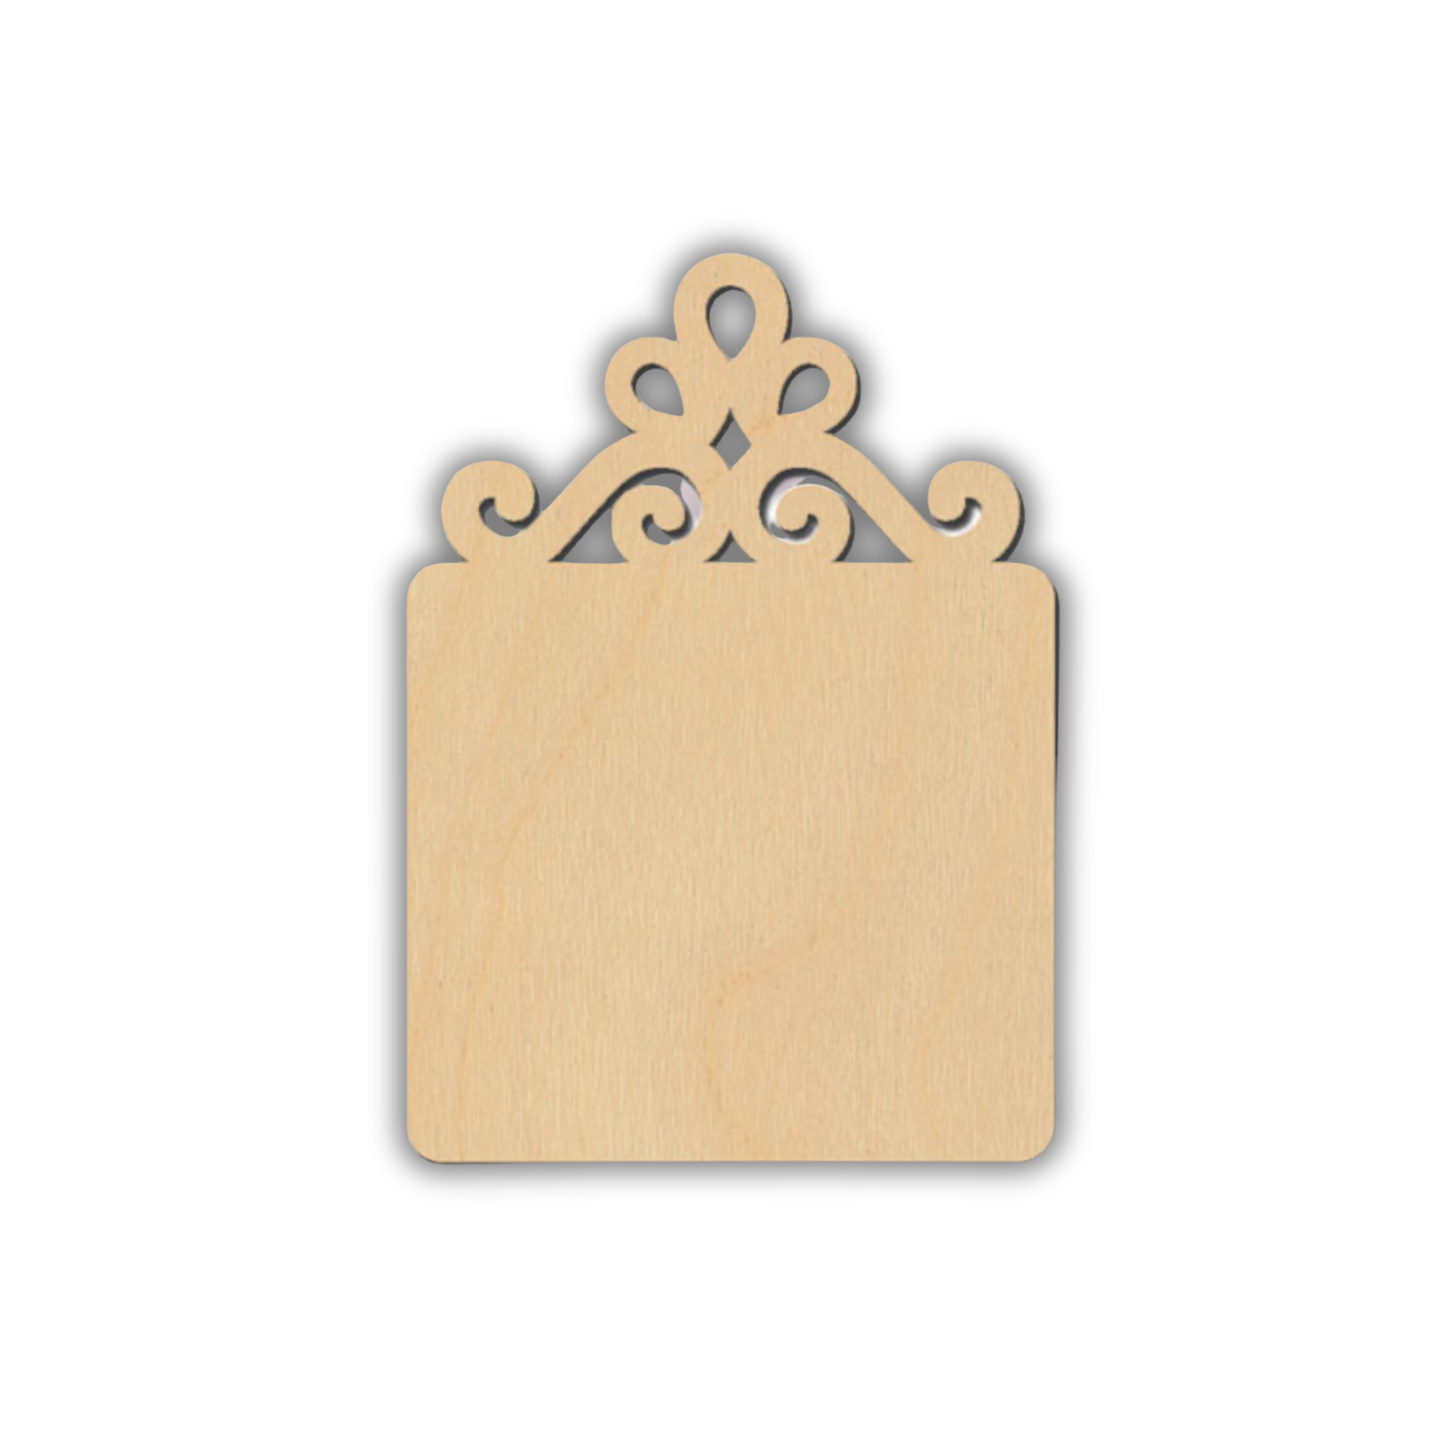 Prince of peace ornament set Out of the Wood